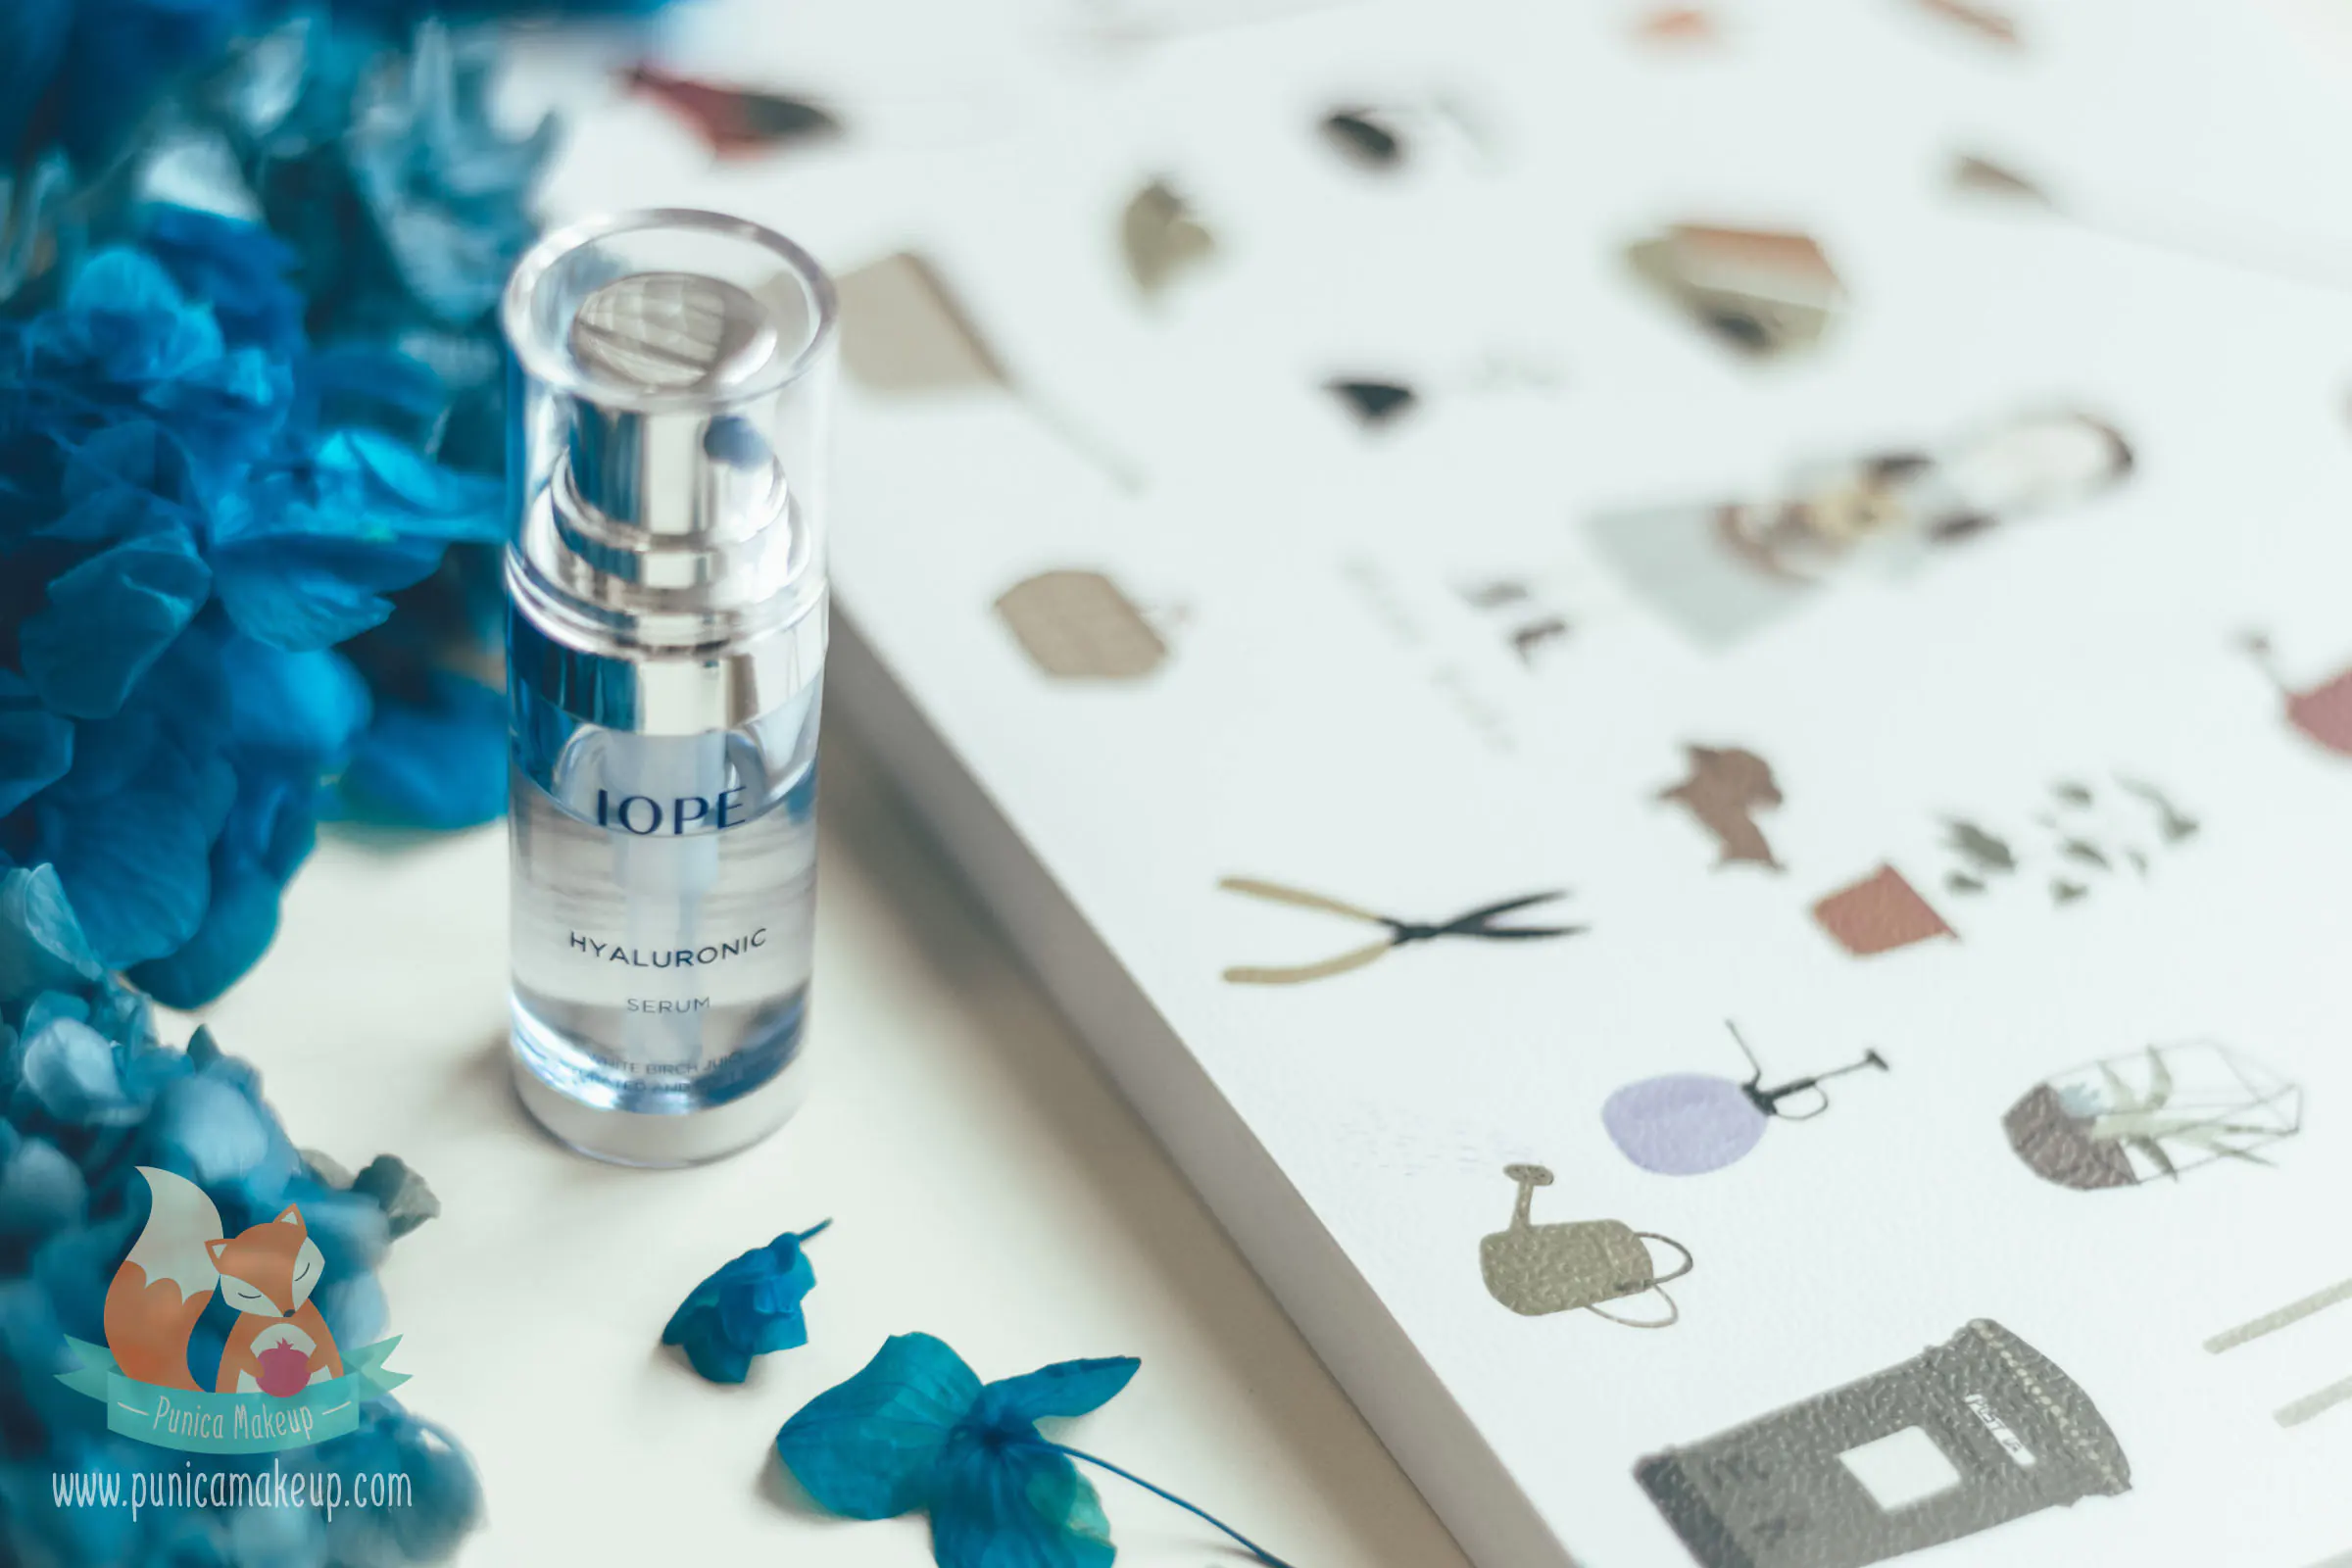 IOPE Hyaluronic Serum Featured